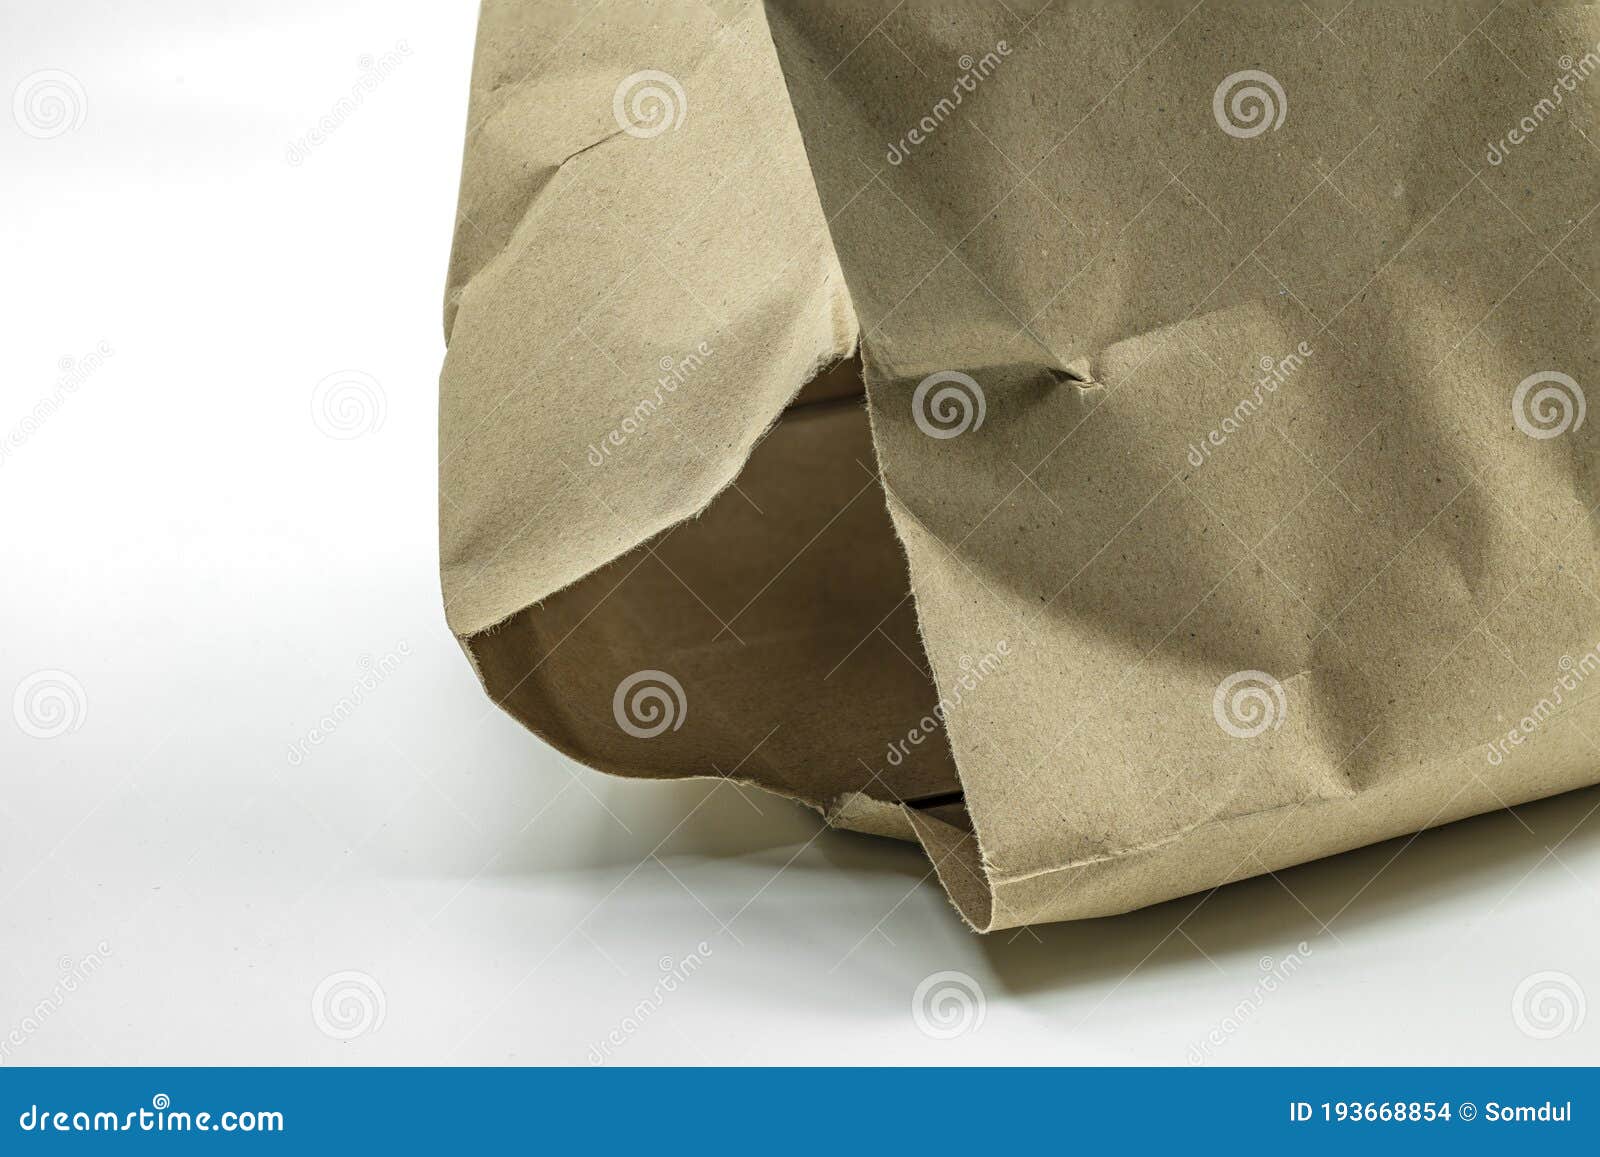 Close Up Large Hole at the Bottom of the Bag, Brown Paper Bag with Damage  Hole on White Background Stock Photo - Image of aged, detail: 193668854